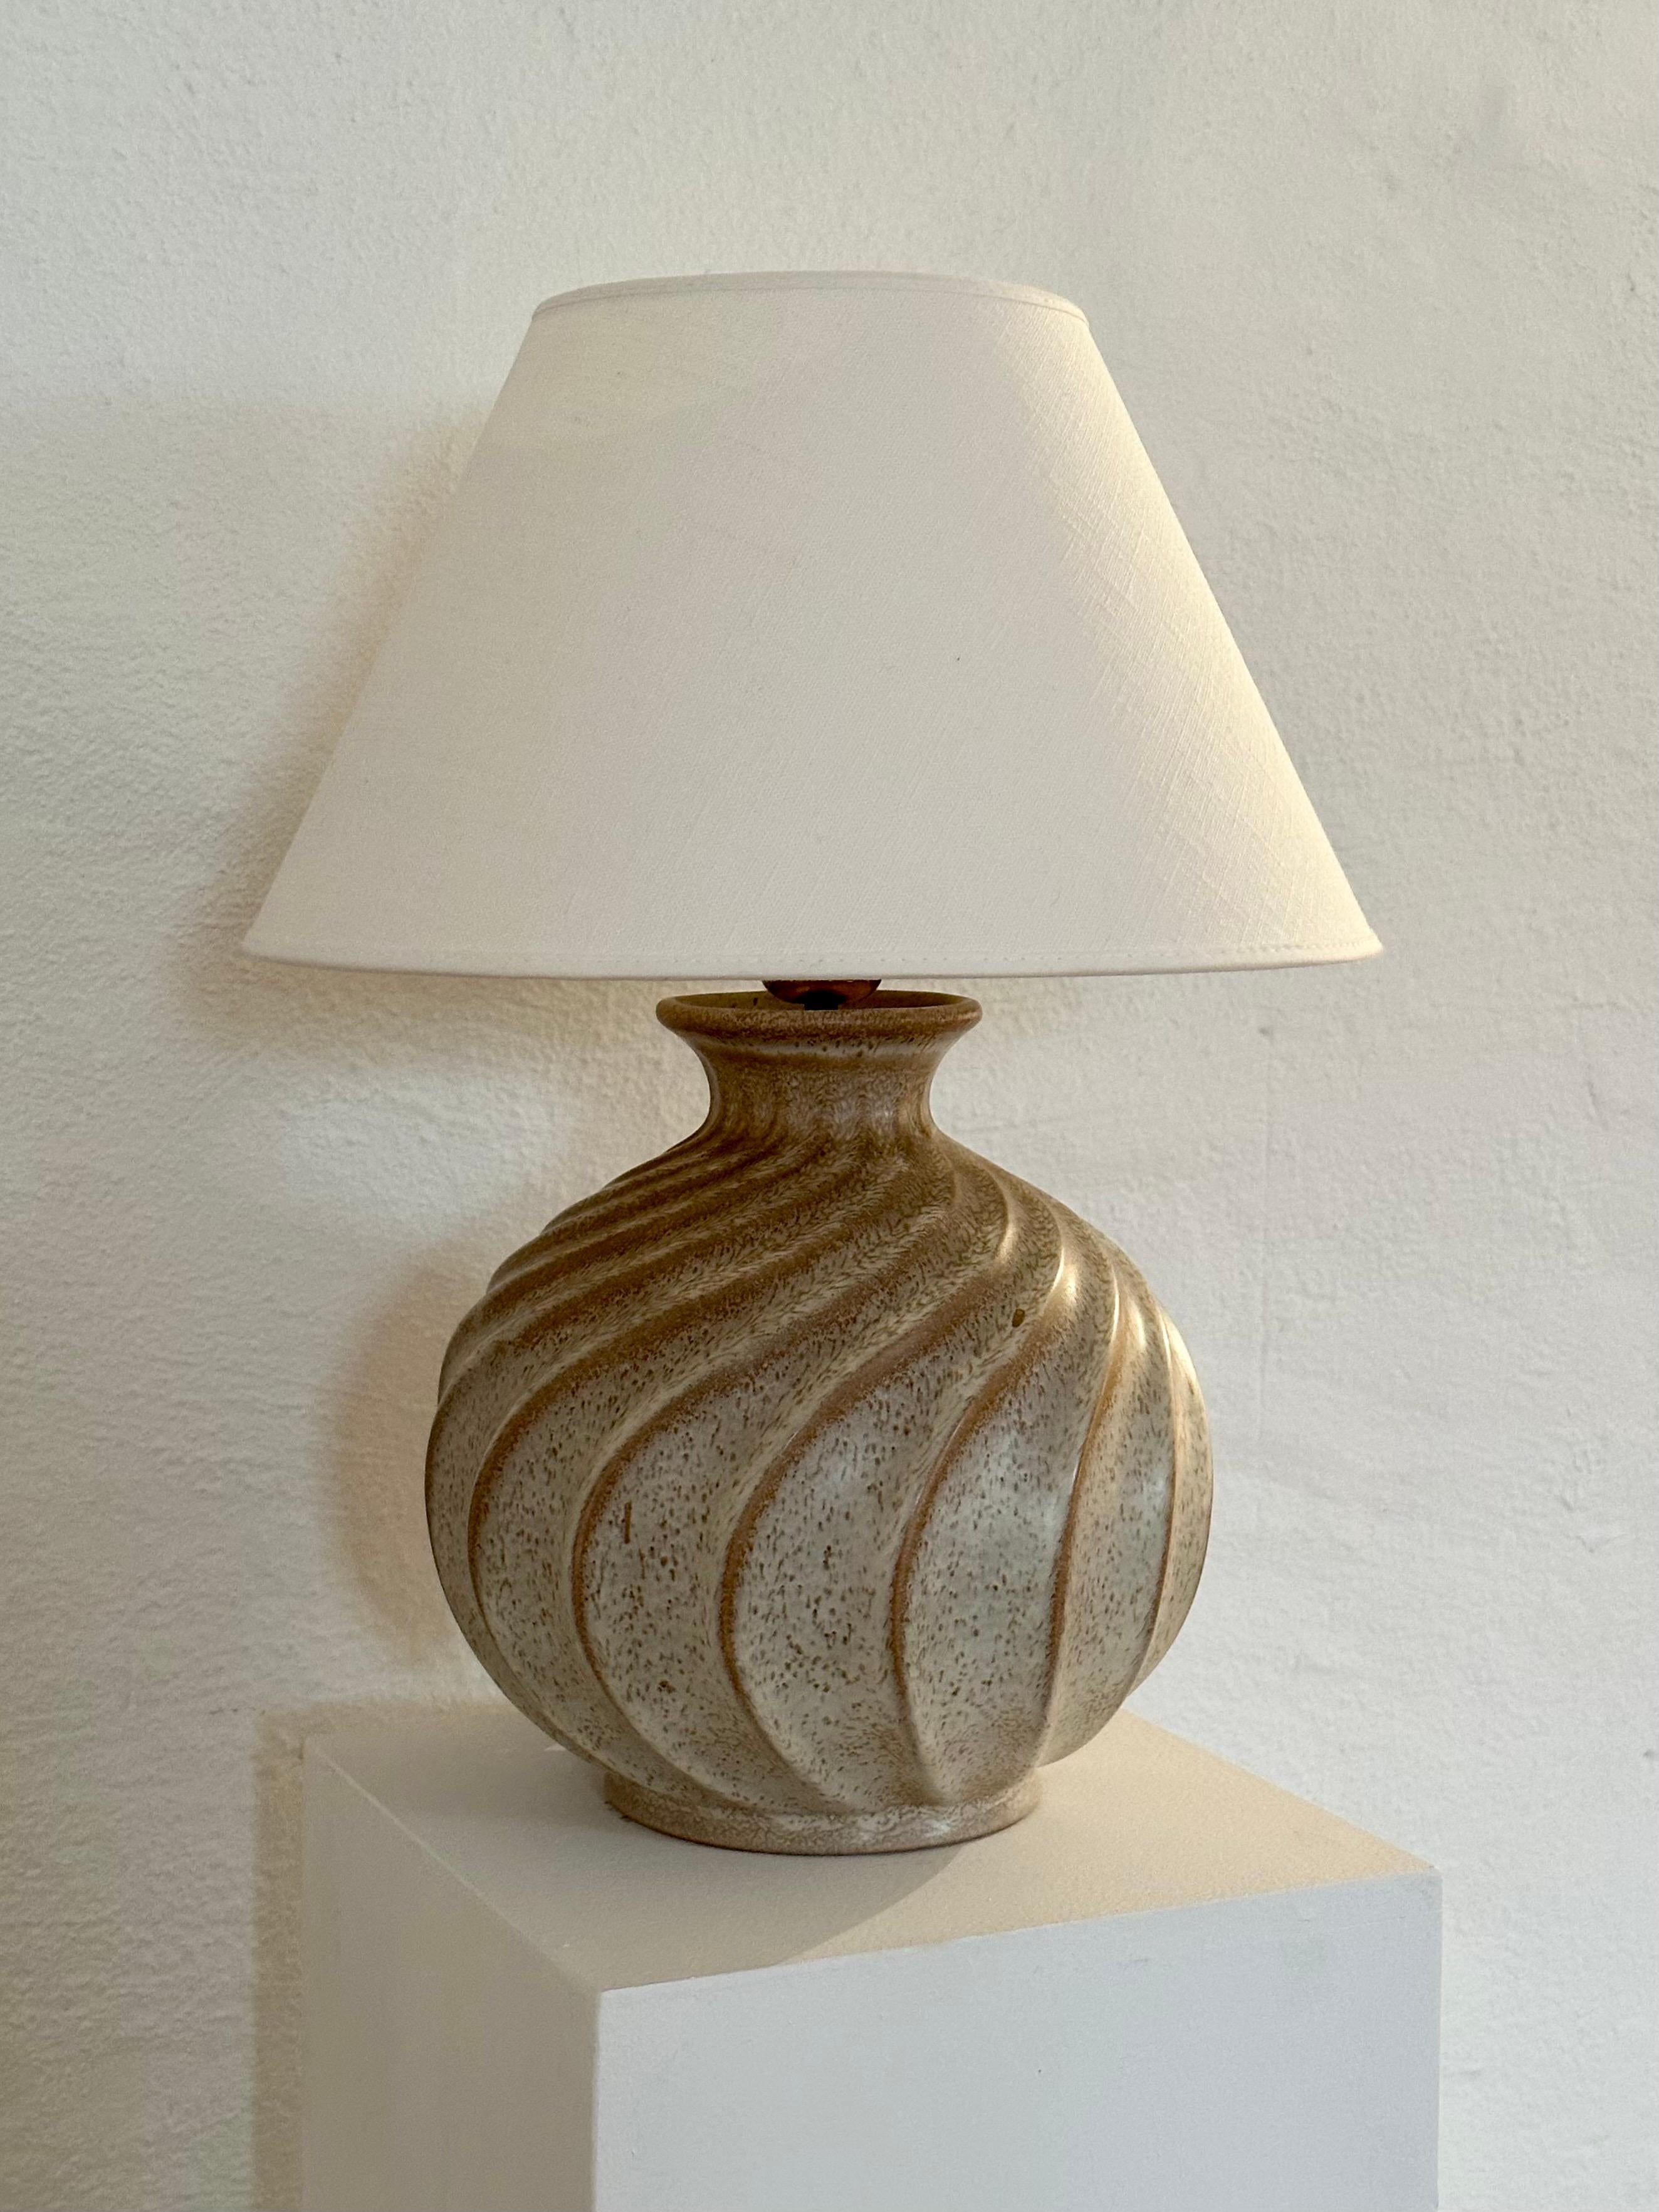 Large table lamp designed by Ewald Dahlskog for Bo Fajans, Sweden, 1930s or early 1940s. This piece is originally a vase of the model D 171 turned lamp. The ceramic base is spherical with twisted channels running down the sides and topped with a